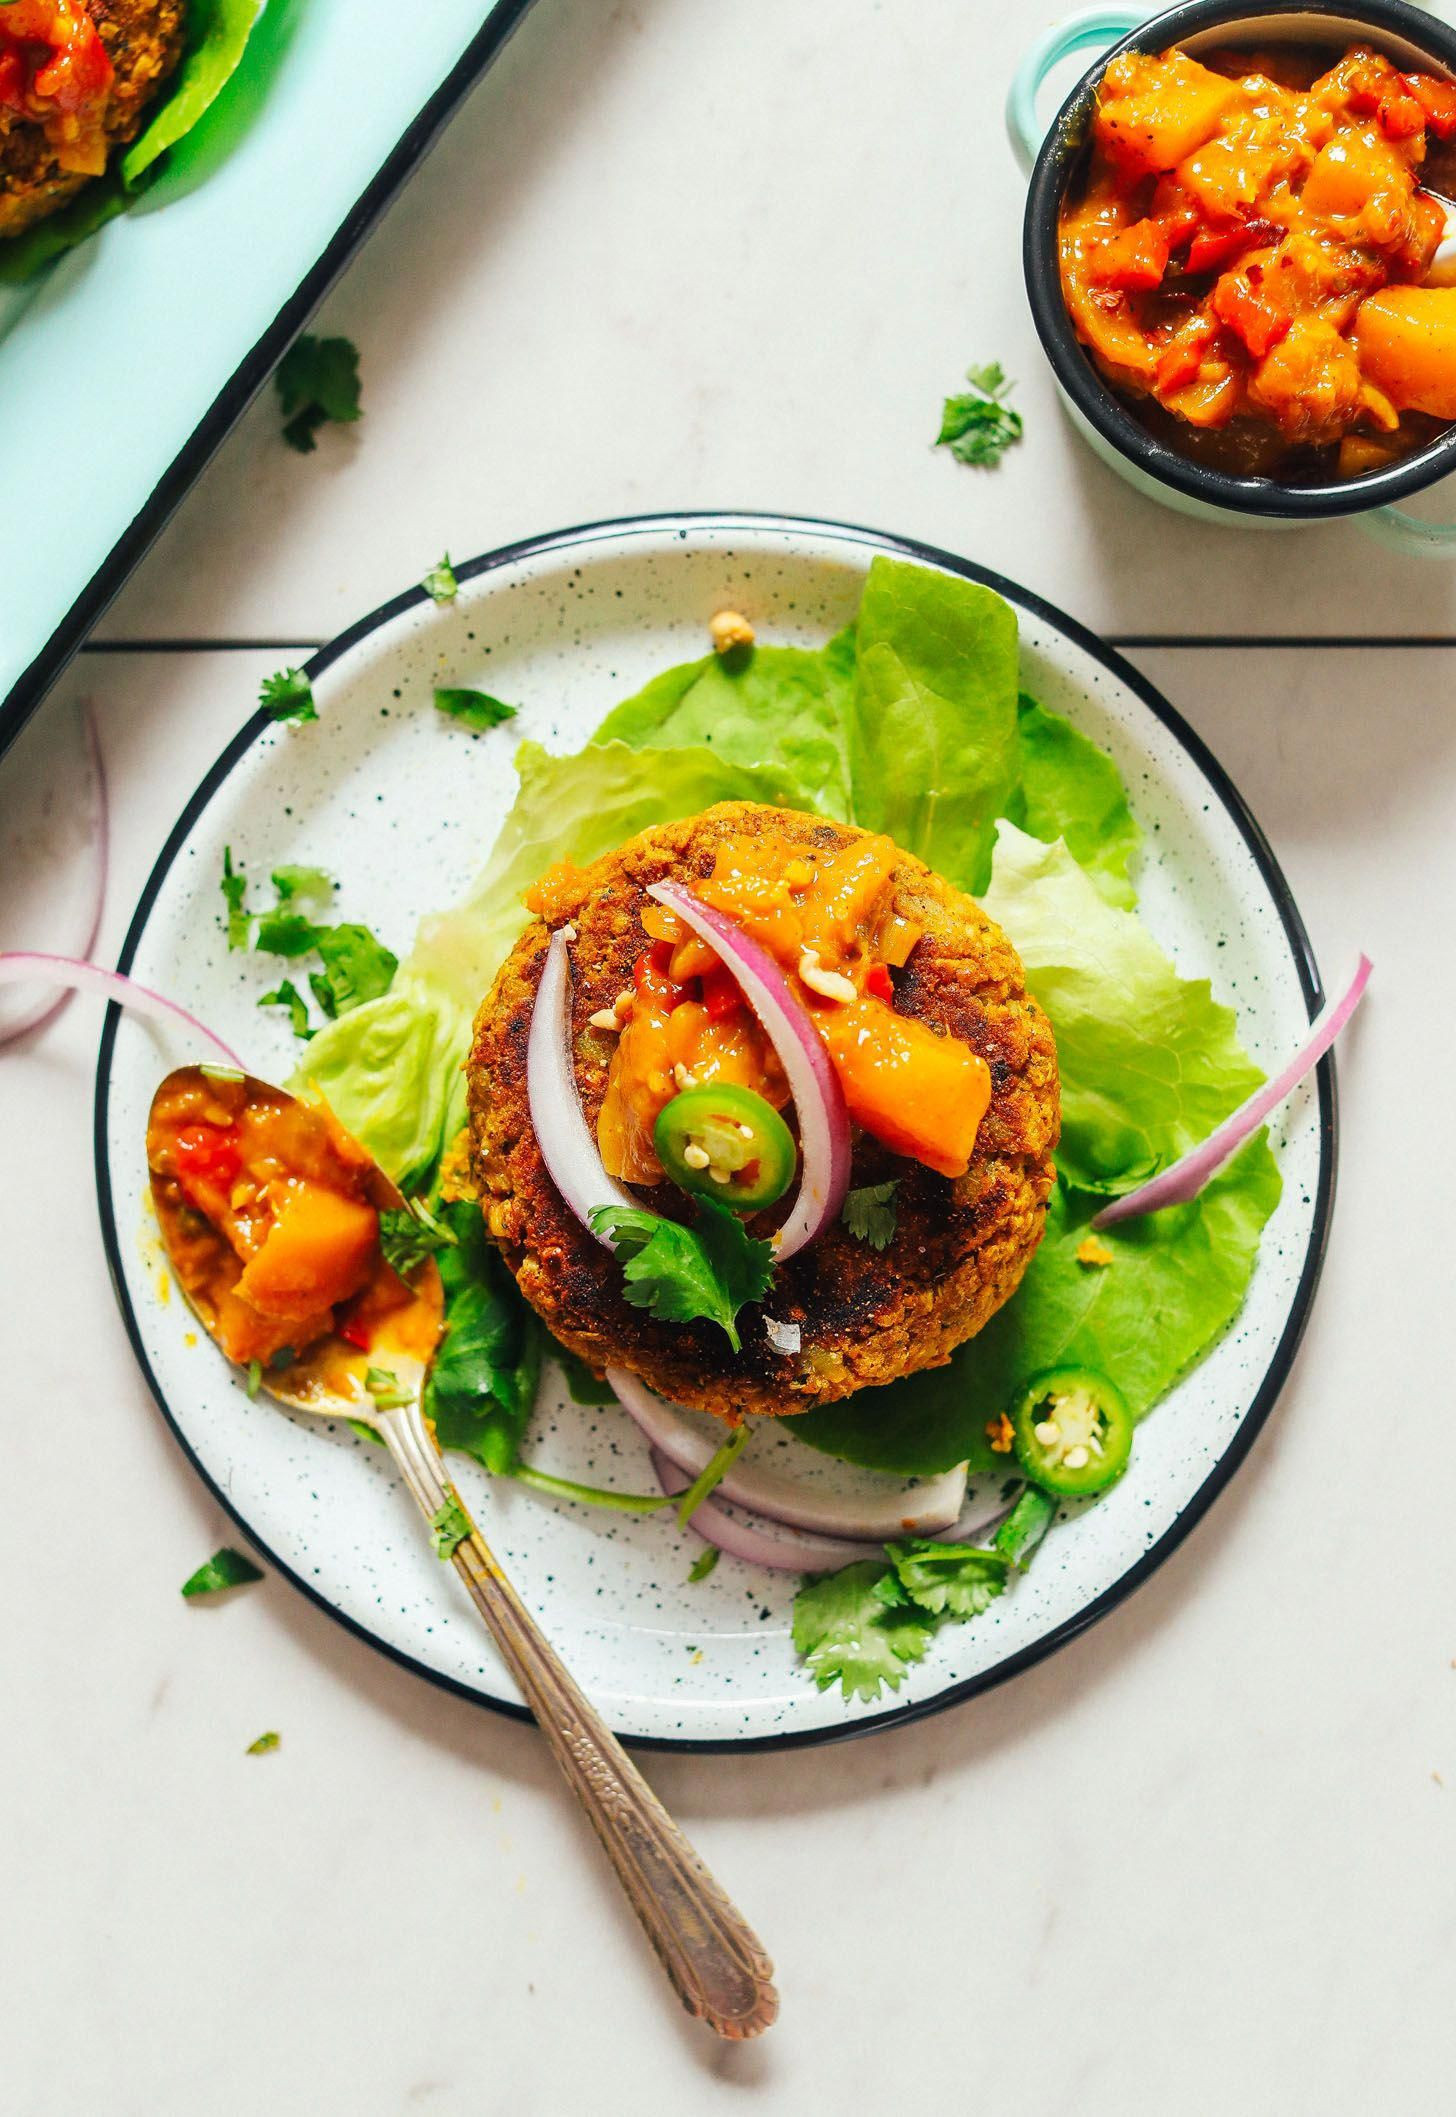 Vegan Chickpea Burgers Recipes
 DELICIOUS Curried Chickpea Burgers 10 ingre nts BIG